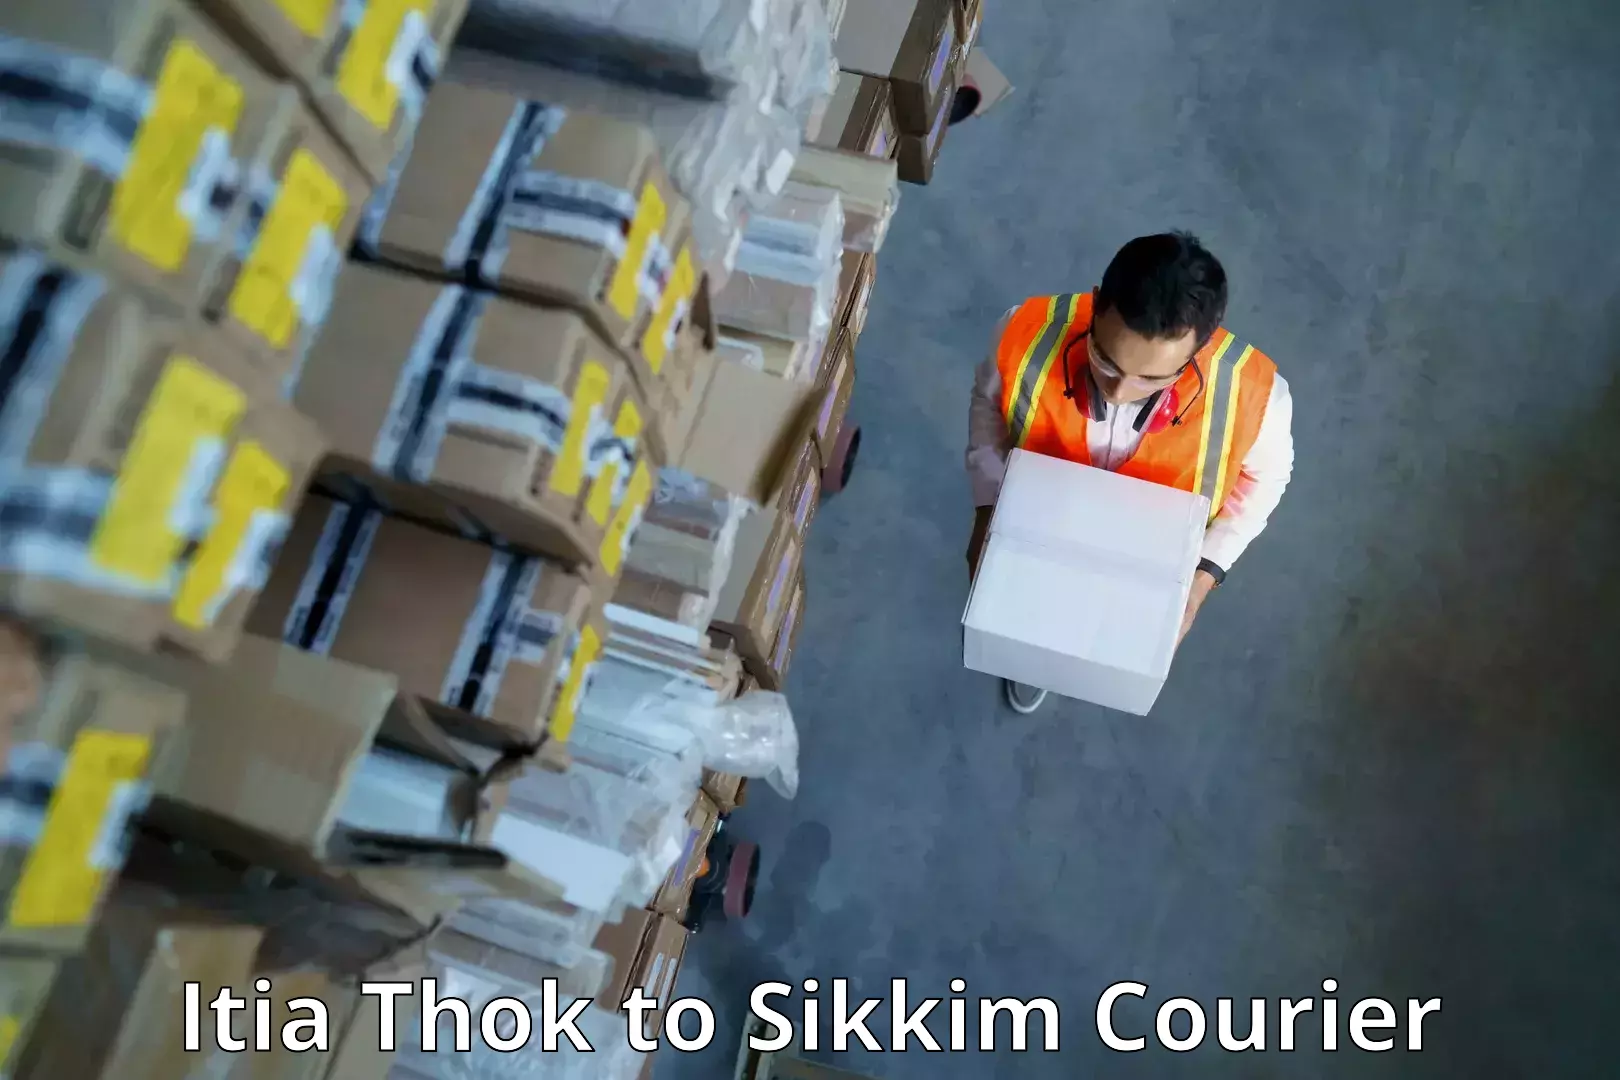 Nationwide delivery network Itia Thok to Sikkim